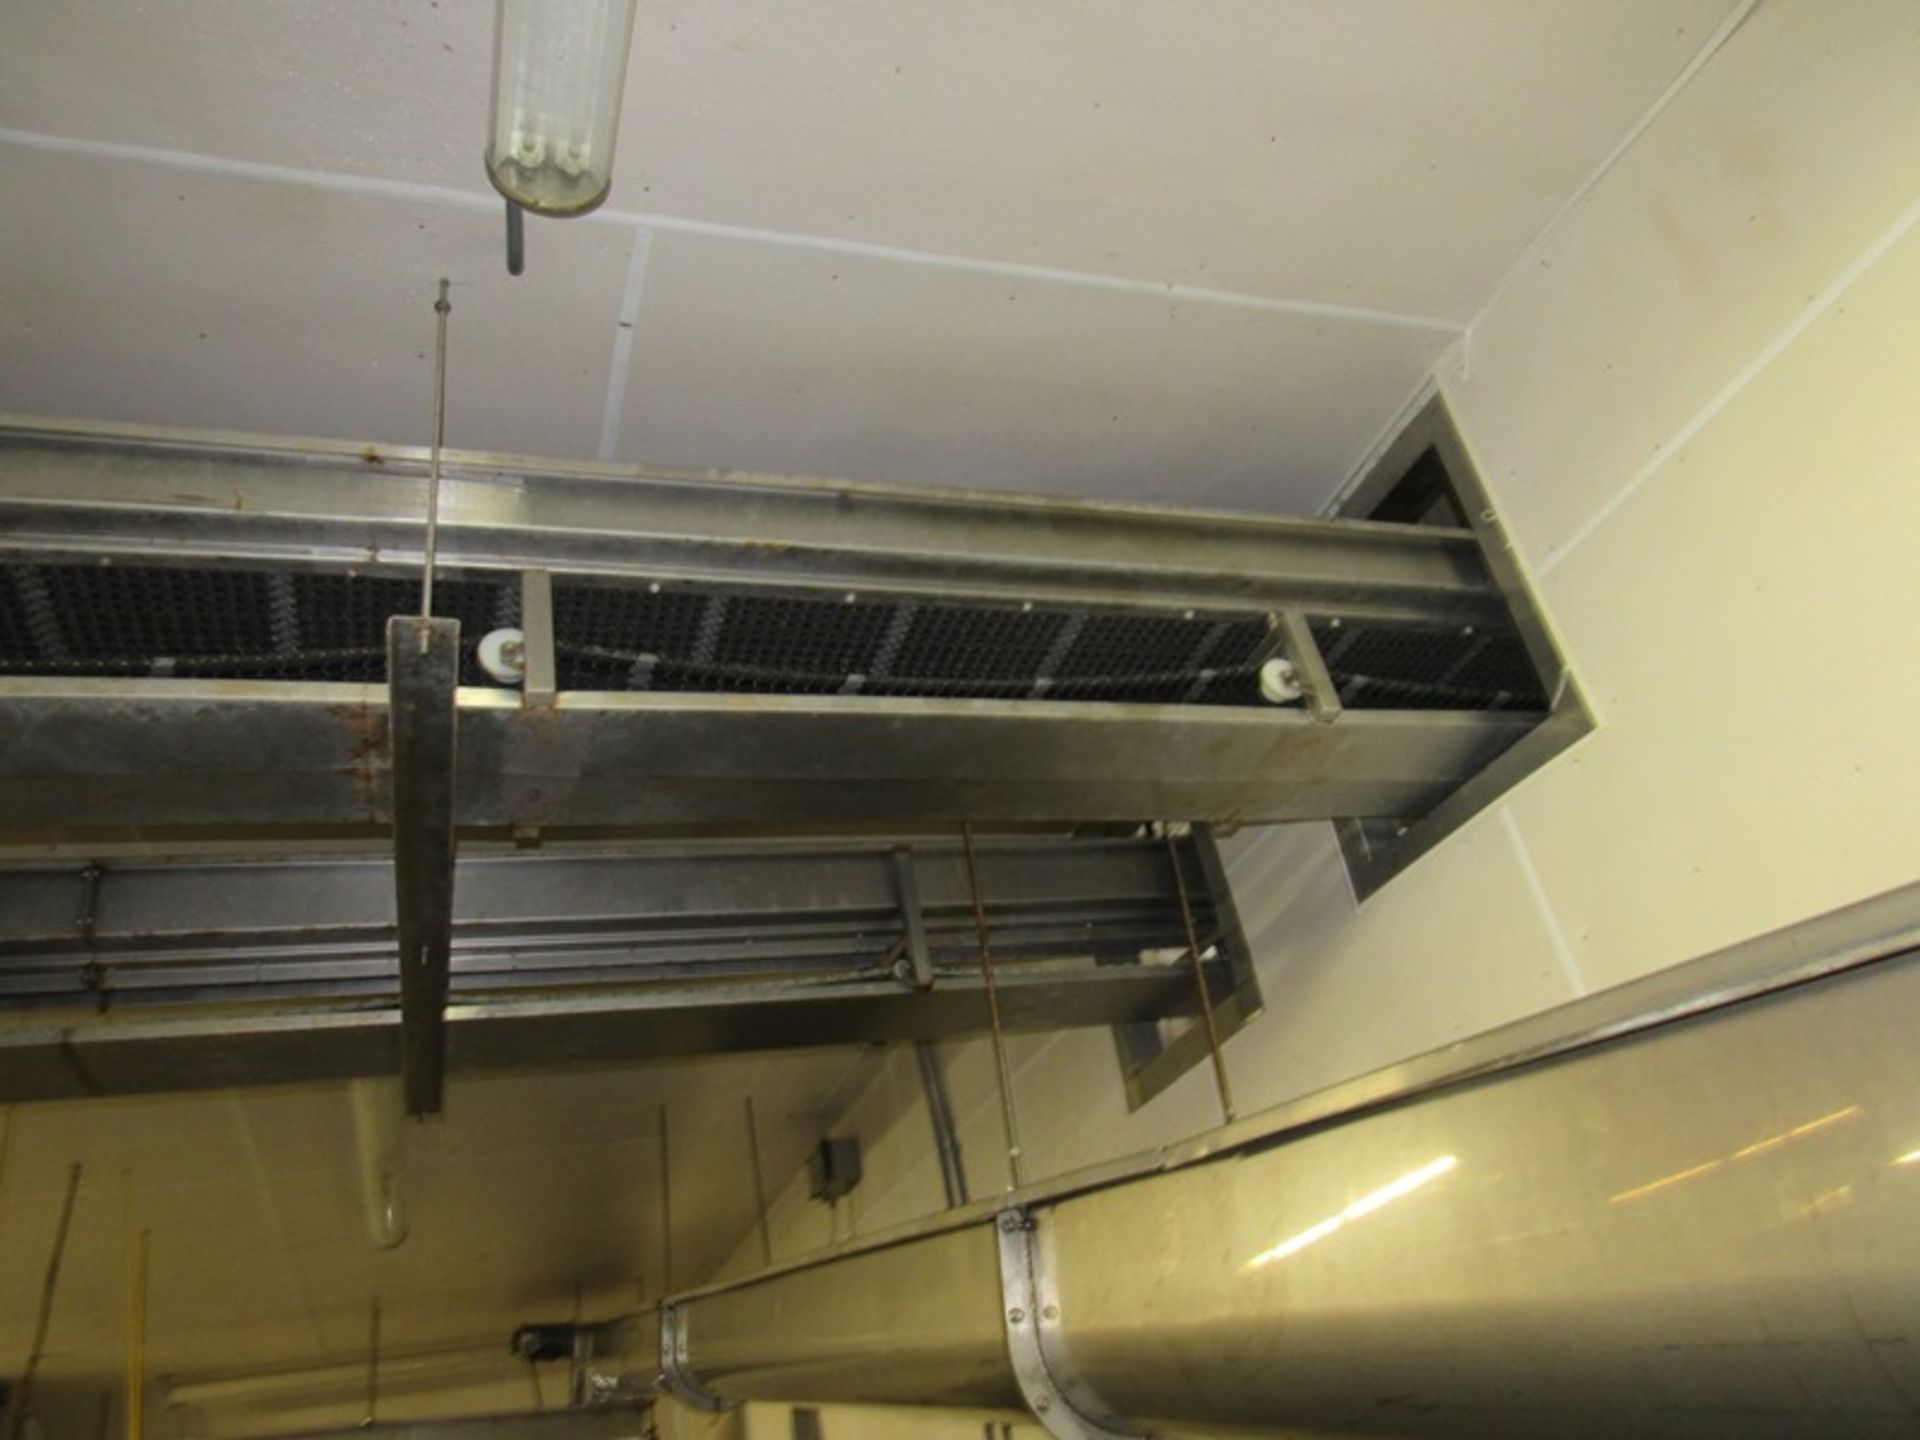 Stainless Steel Ceiling Suspend Conveyor, 6" W X 36' L, 1 h.p. motor (Required Loading Fee $1,000.00 - Image 2 of 6